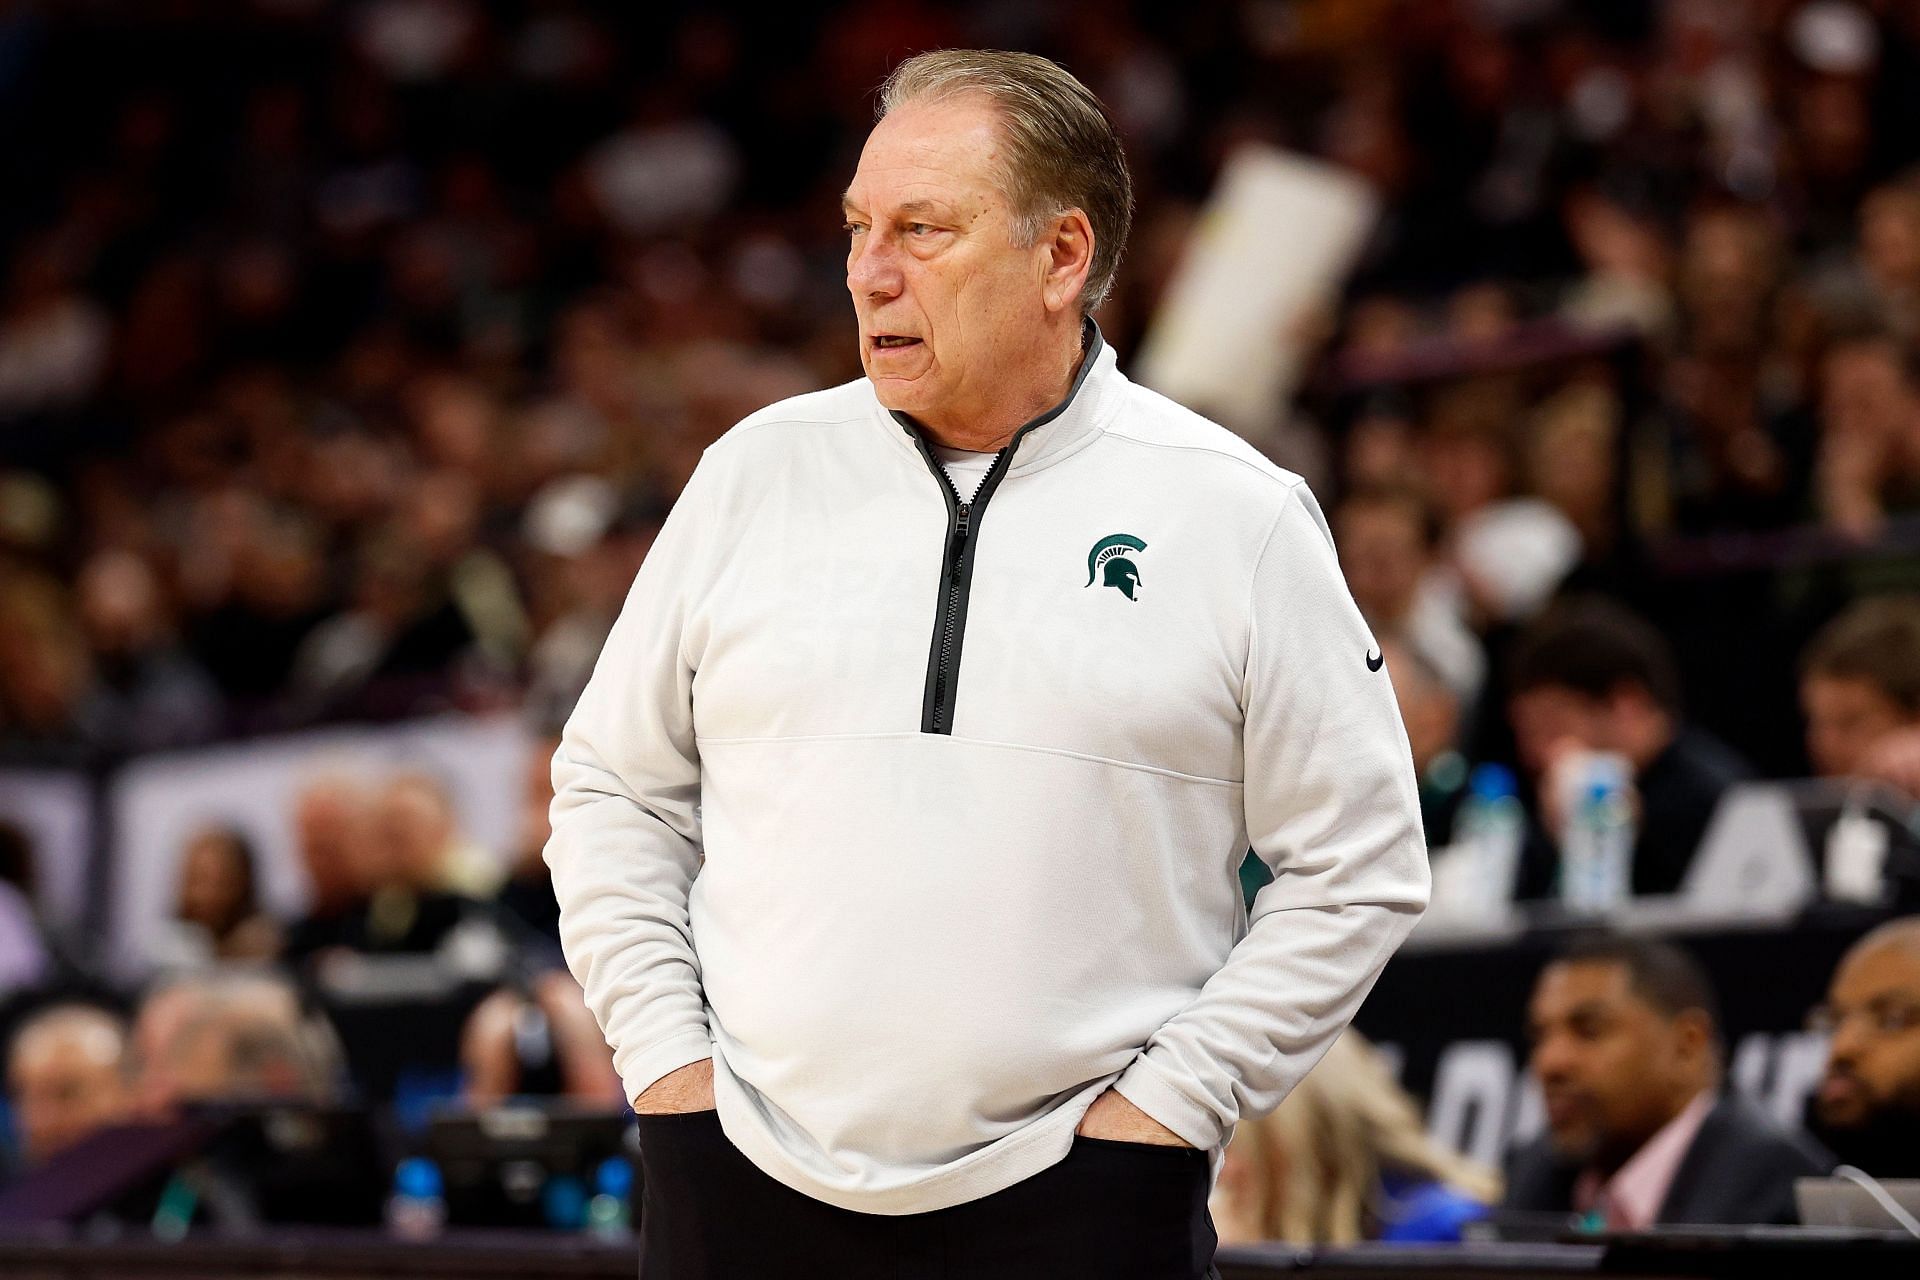 Michigan State coach Tom Izzo earns an annual salary of $6,196,169.